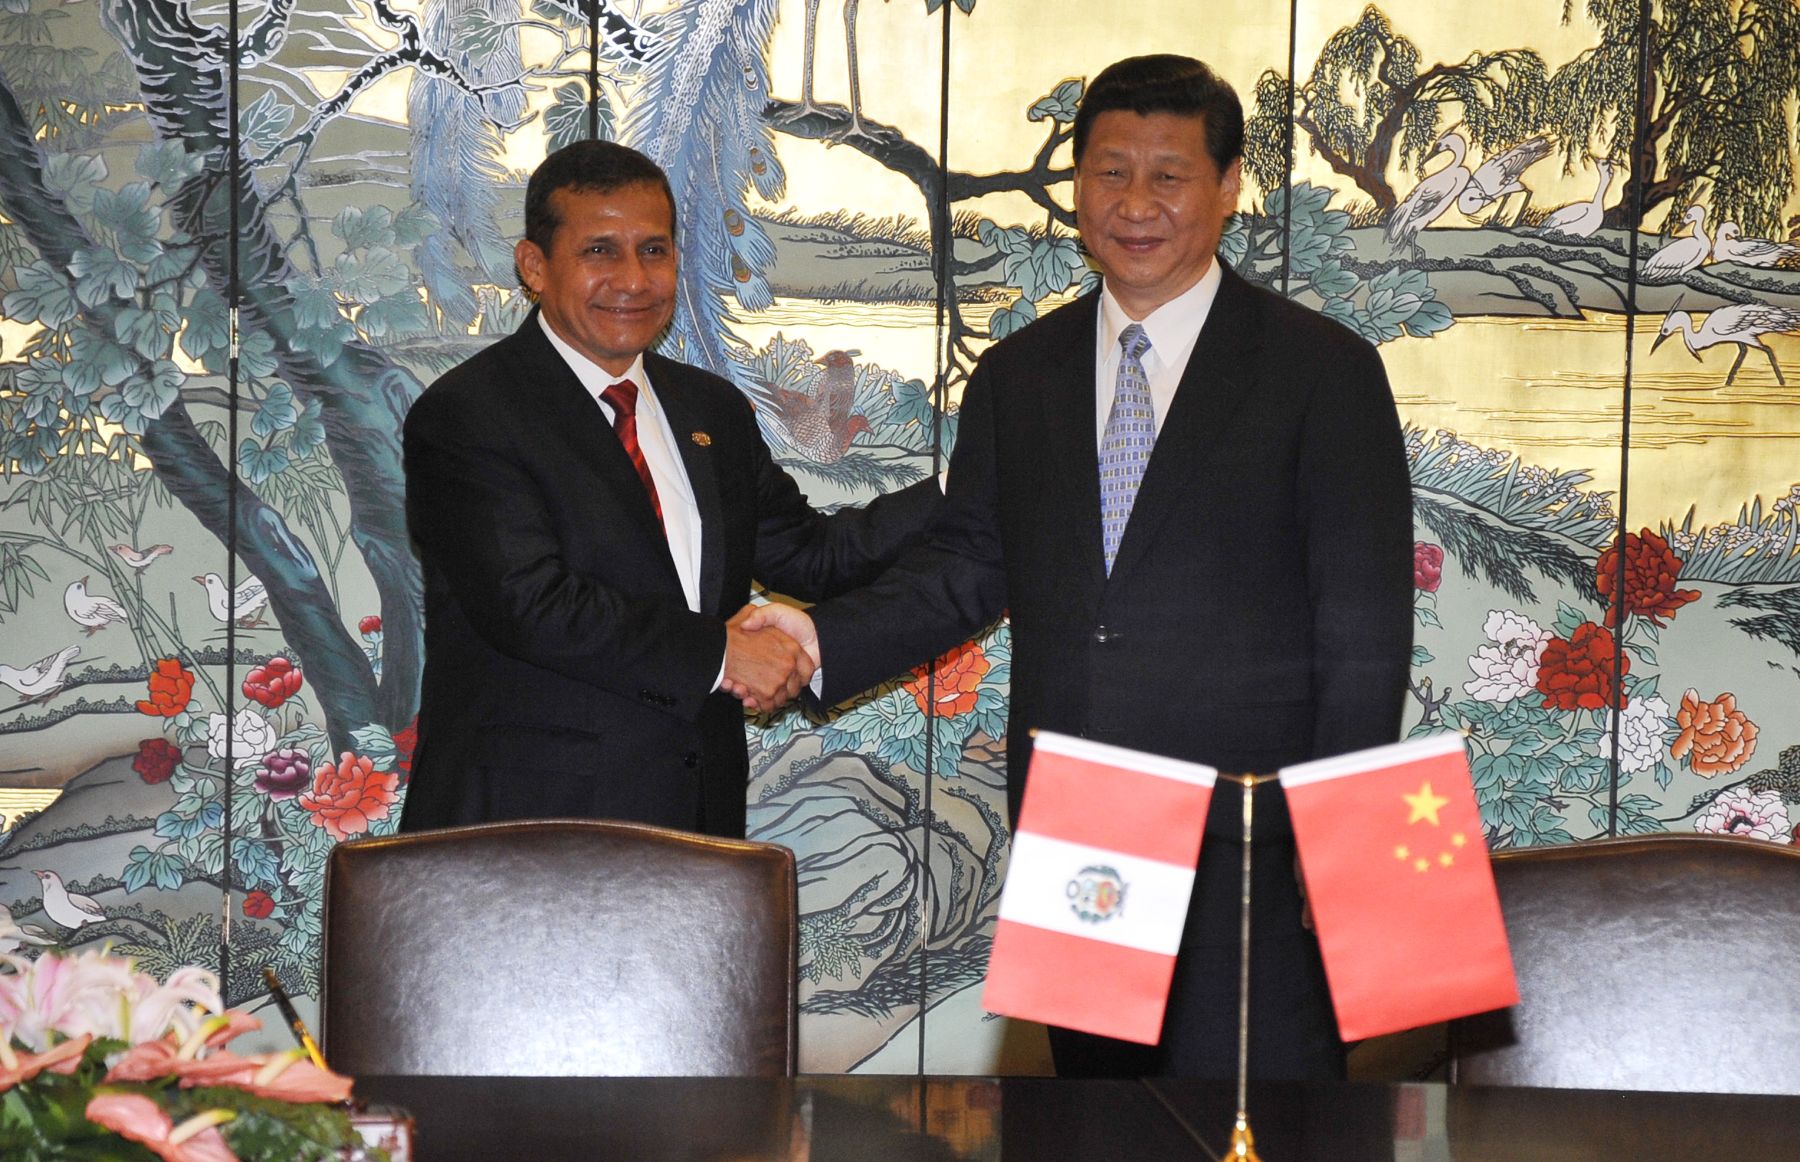 A number of cooperation agreements between Peru and China were signed Saturday in the presence of Presidents Ollanta Humala and Xi Jinping. Photo: ANDINA/Prensa Presidencia